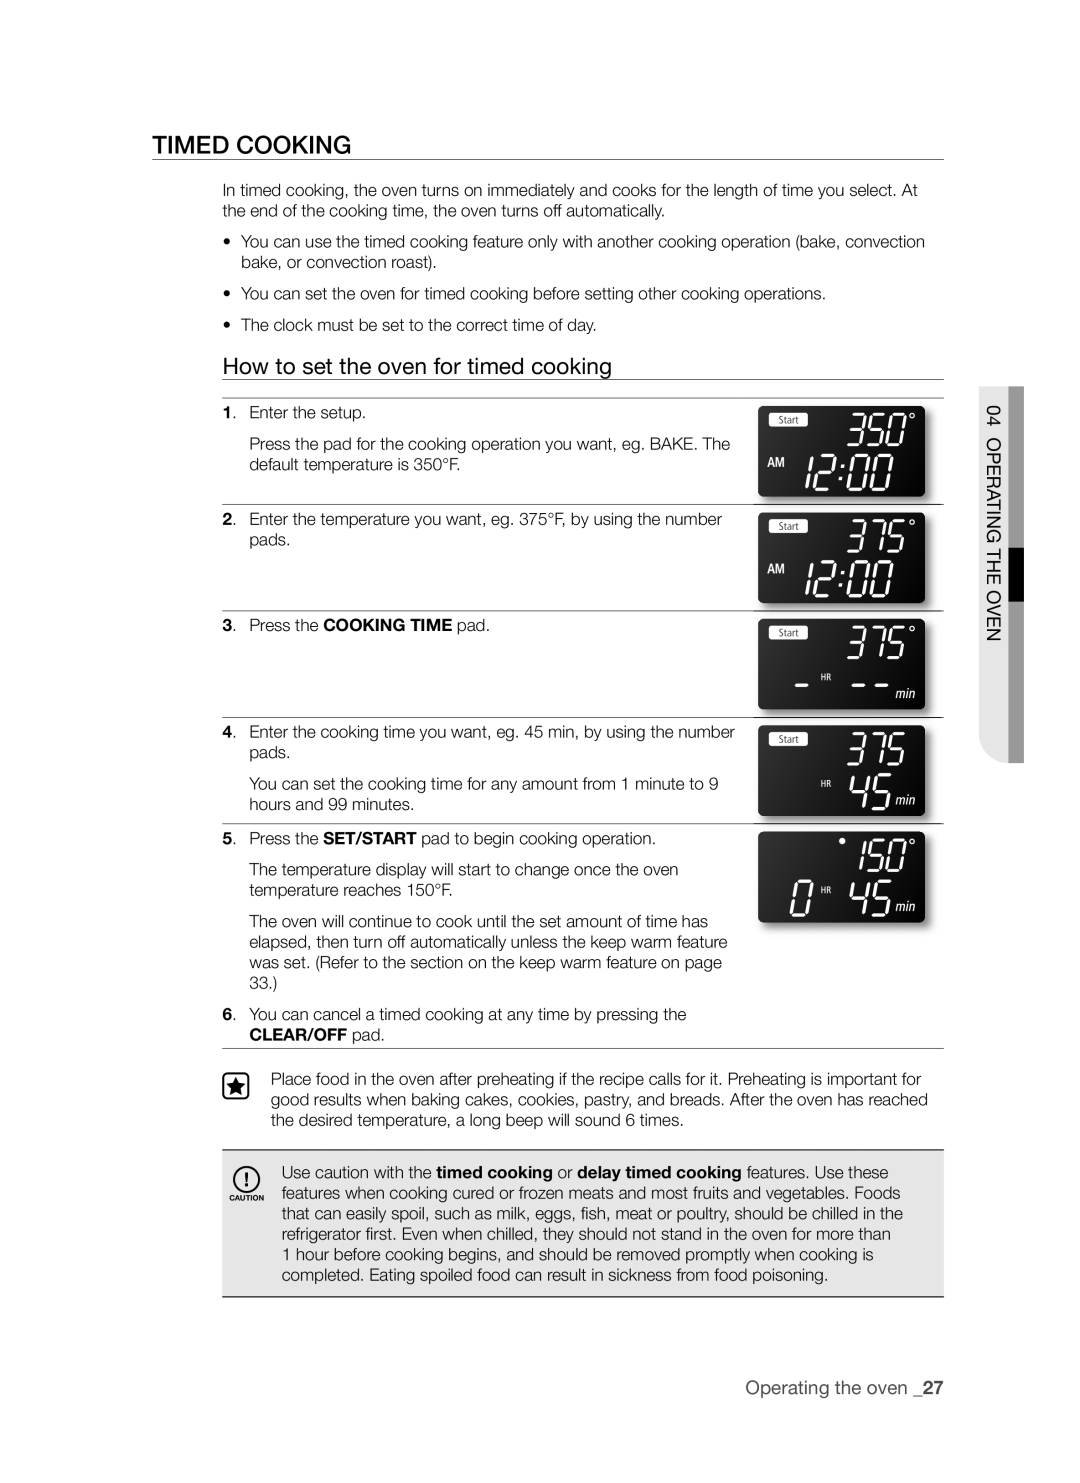 Samsung FTQ353 user manual Timed Cooking, How to set the oven for timed cooking, Operating The Oven, Operating the oven 2 